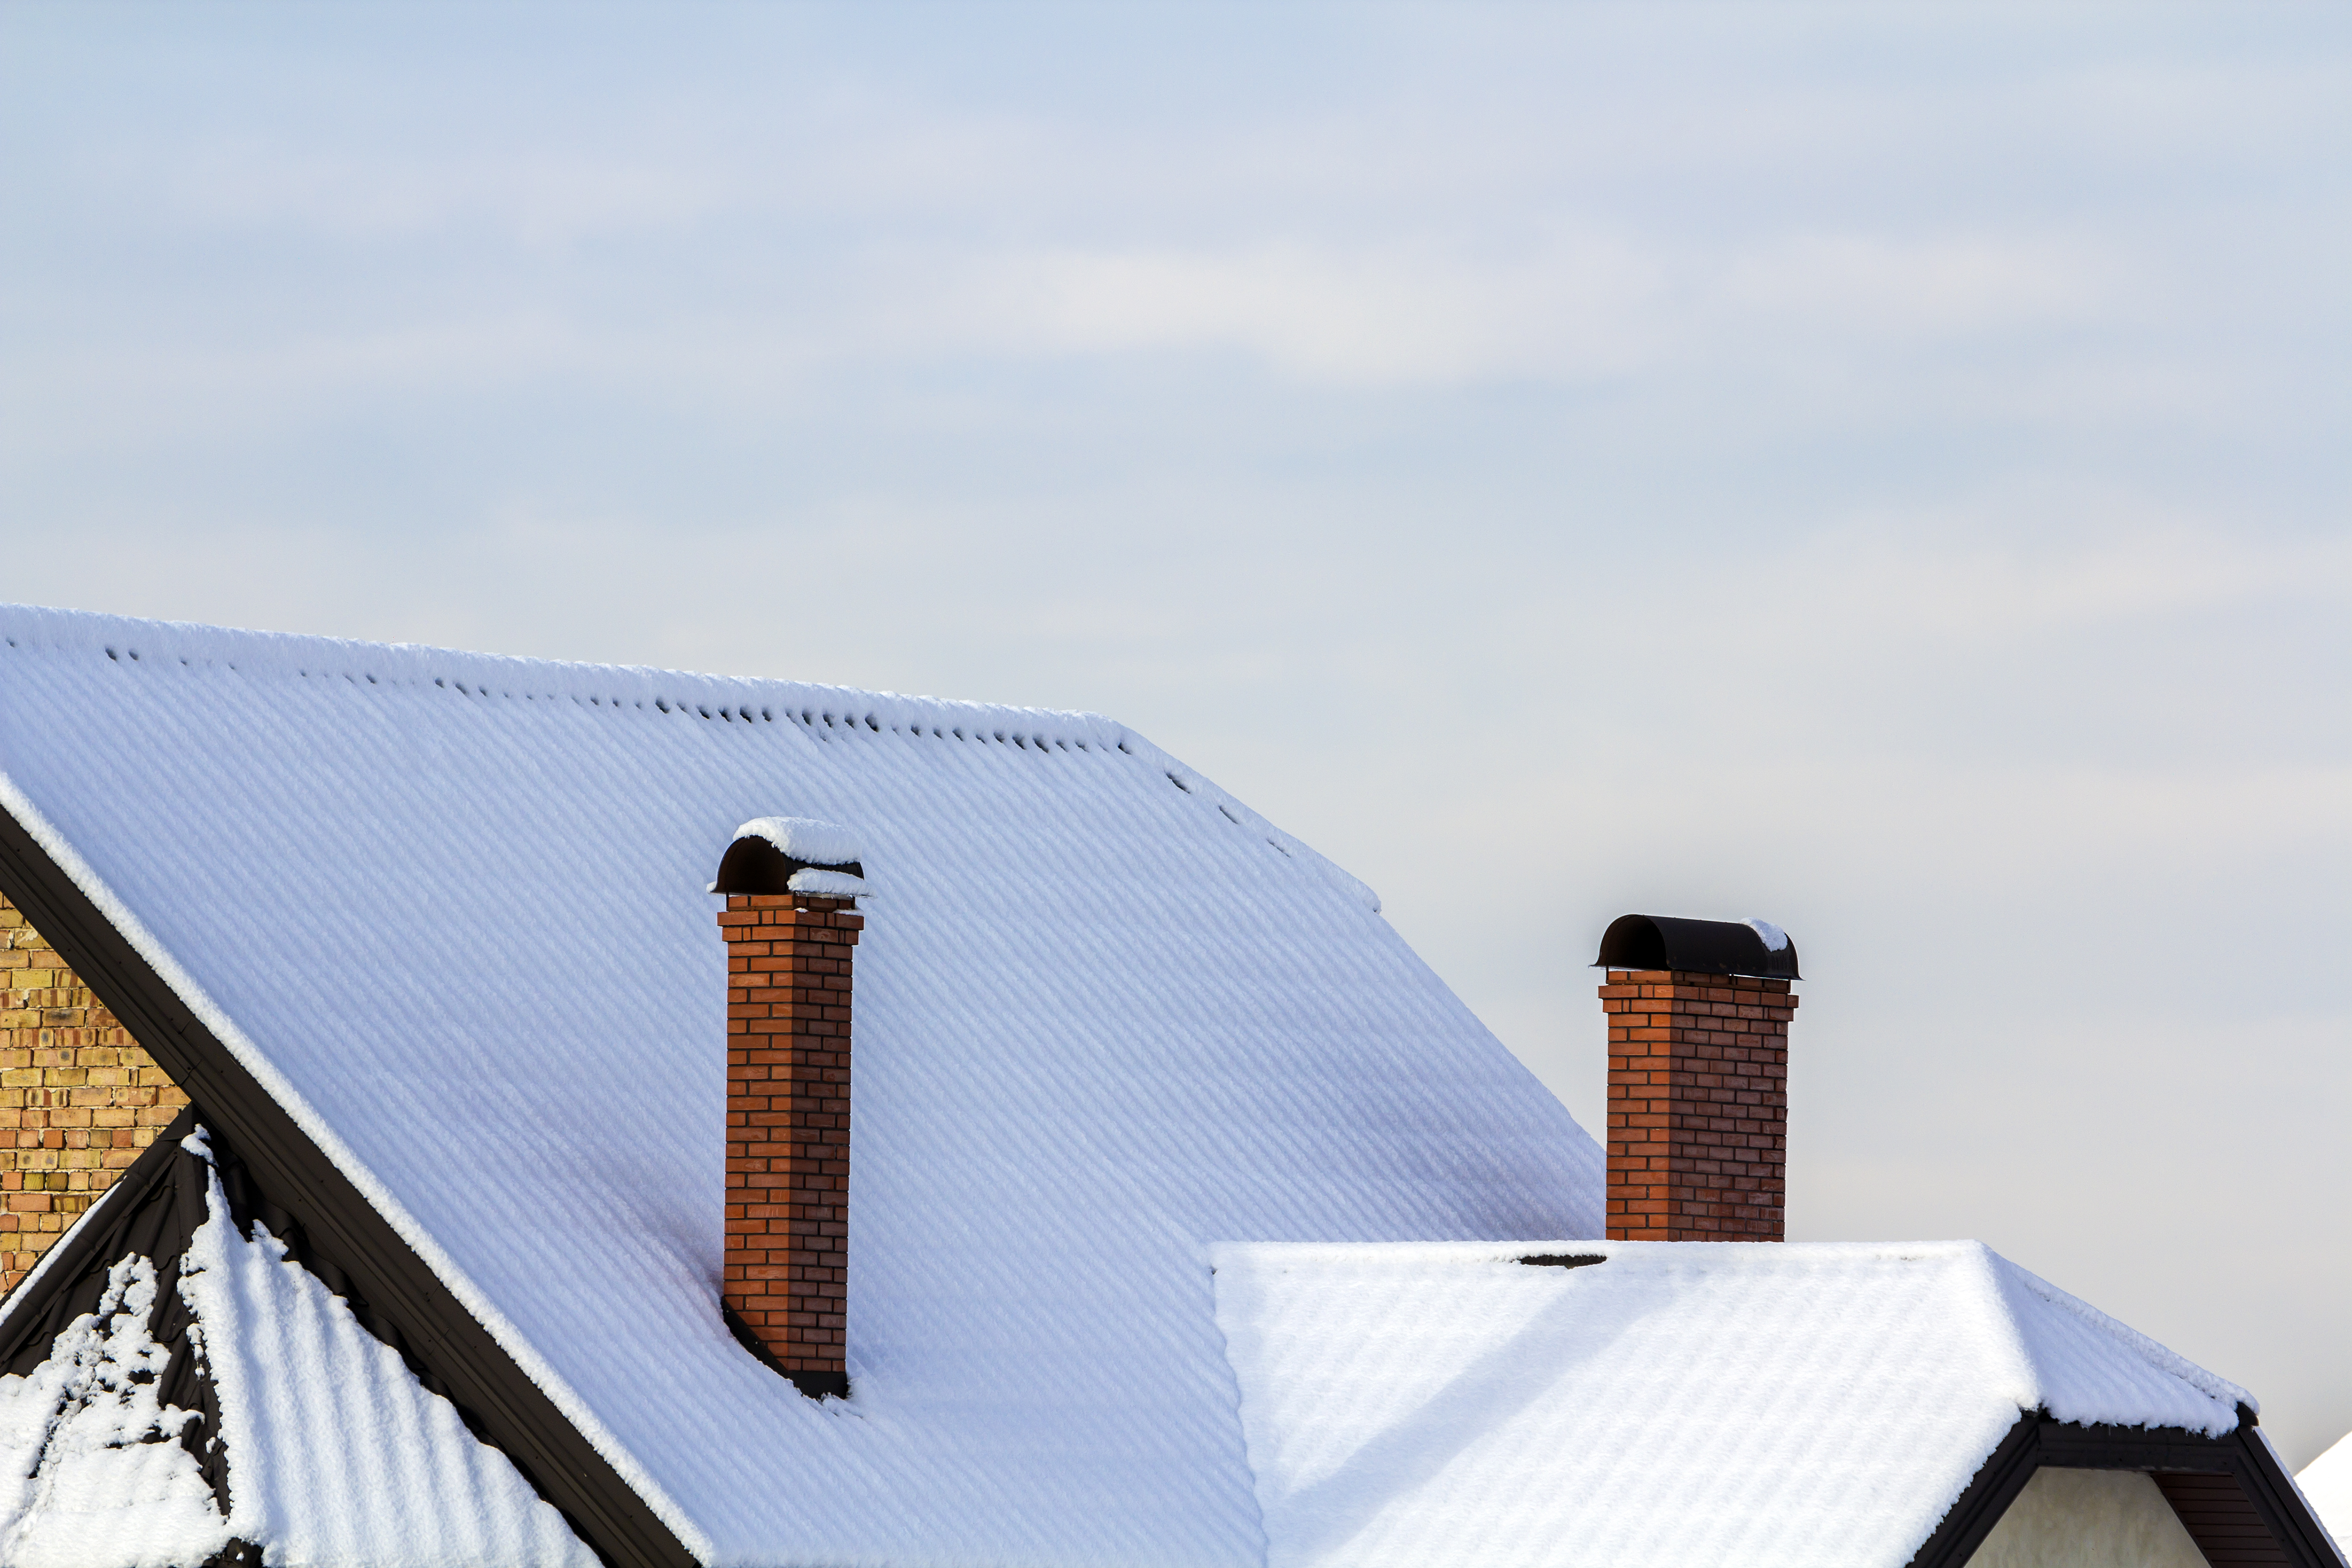 Image showing a light amount of snow covering a roof and chimneys